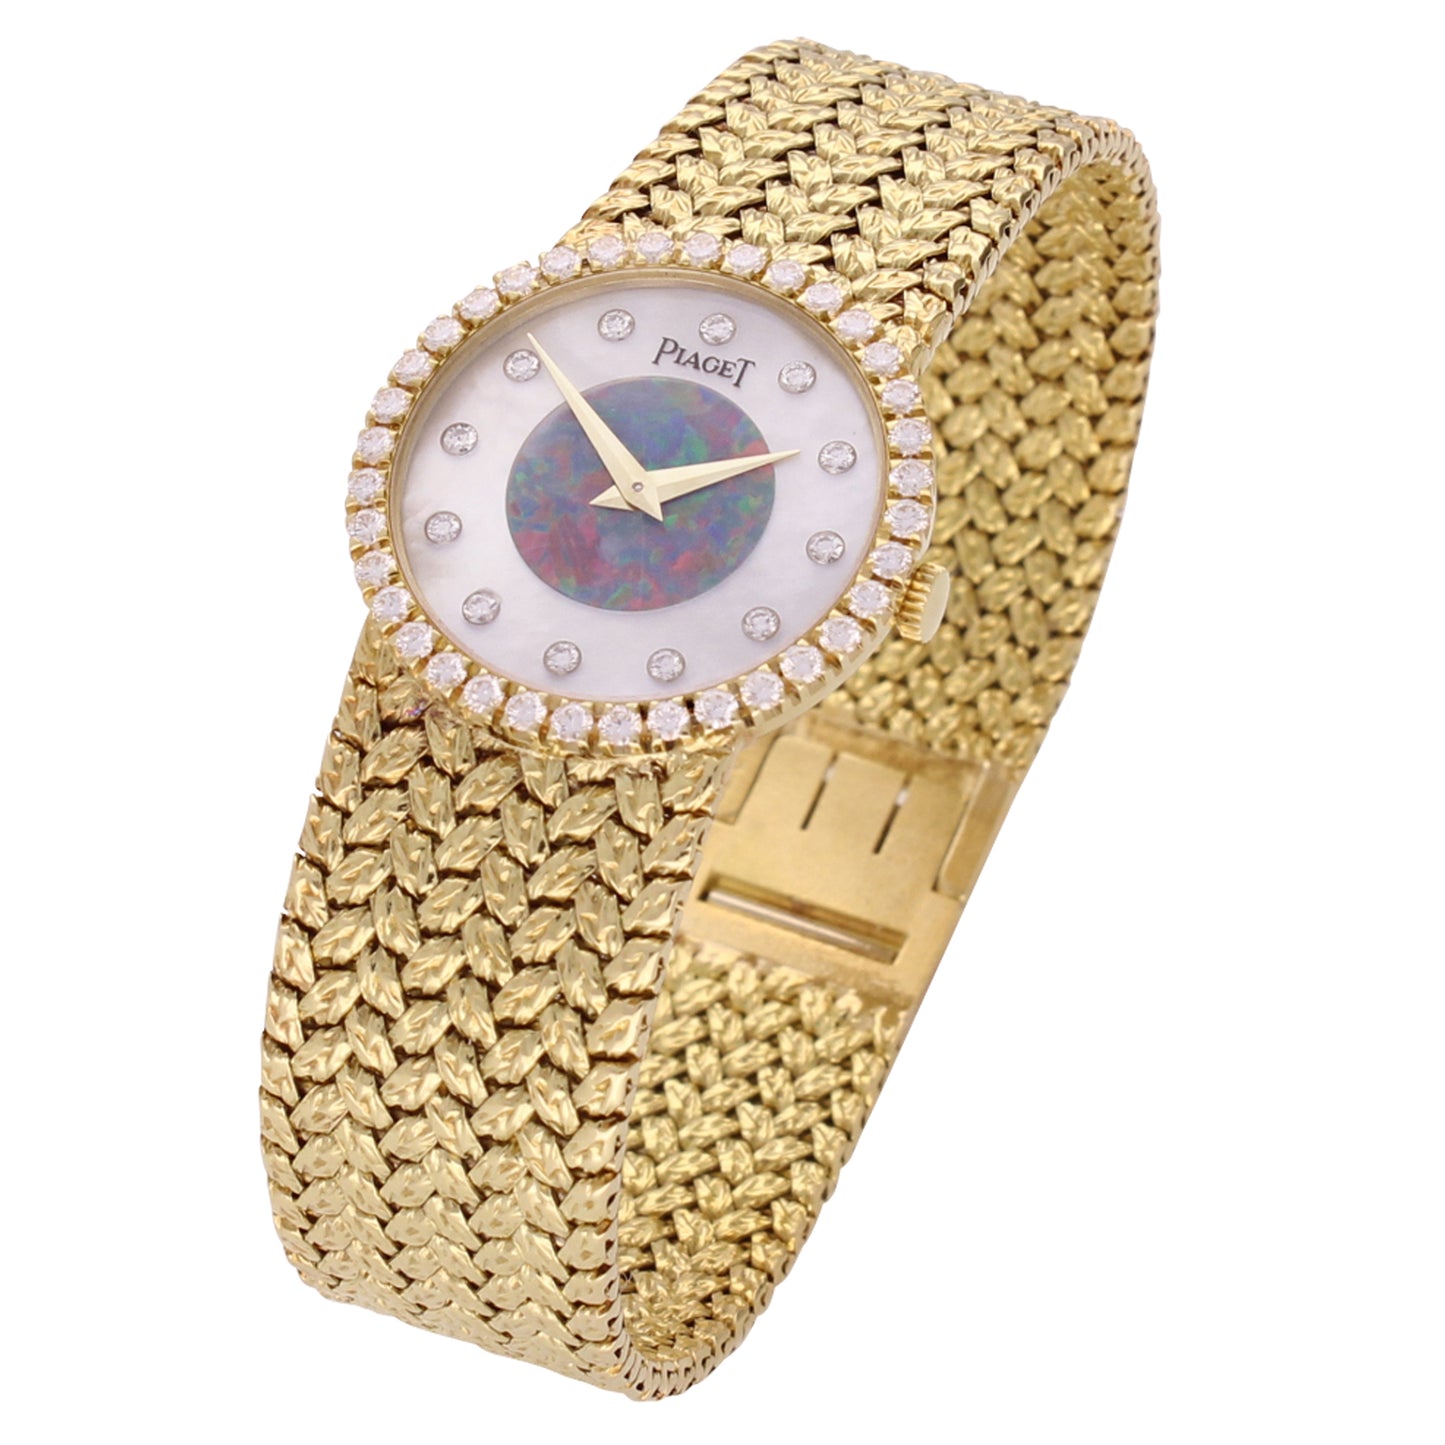 18ct yellow gold Piaget bracelet watch with mother of pearl and opal dial. Made 1970